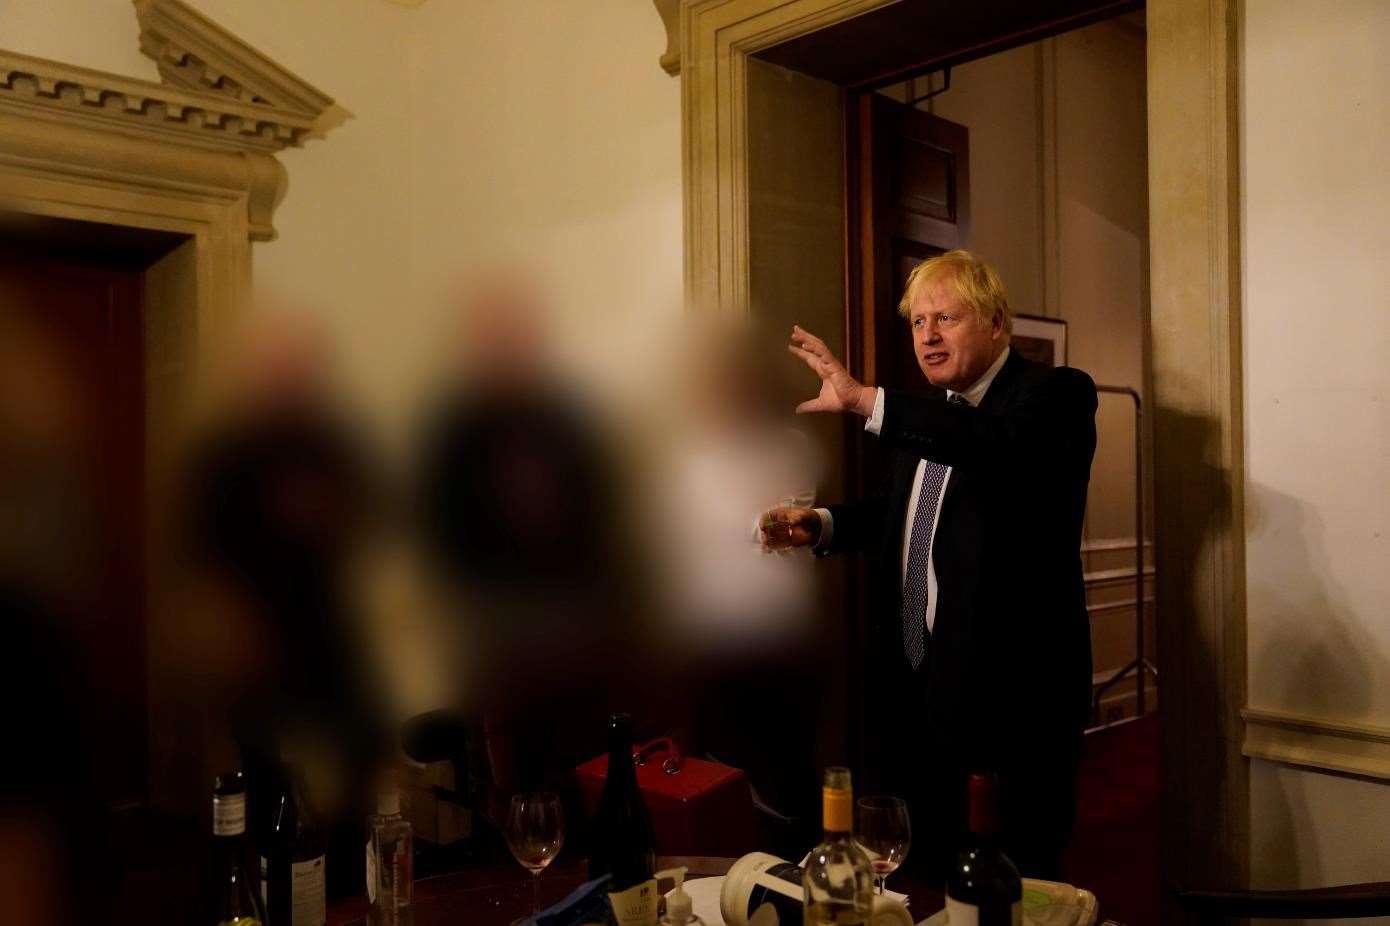 Boris Johnson at a gathering in 10 Downing Street (Sue Gray Report/Cabinet Office)